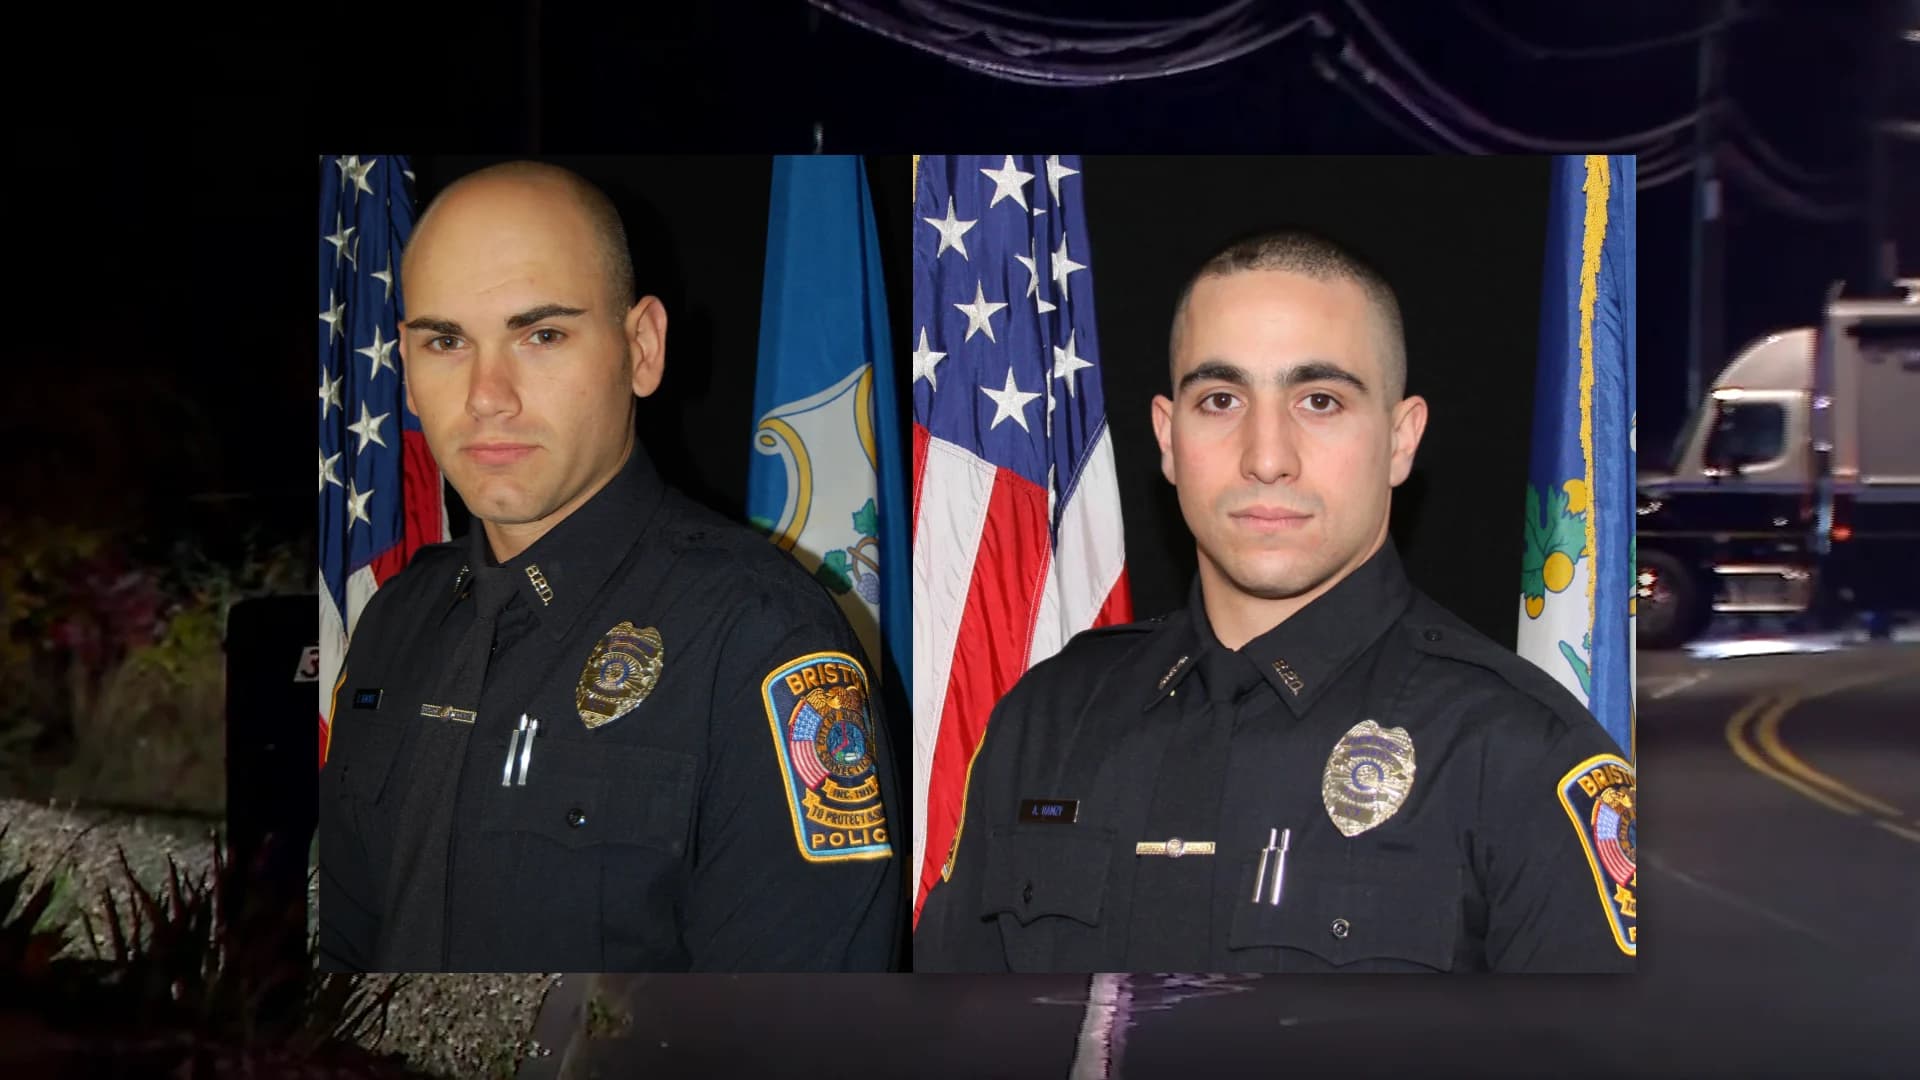 LIVE VIDEO: Funeral services for Lt. Dustin DeMonte and Sgt. Alex Hamzy